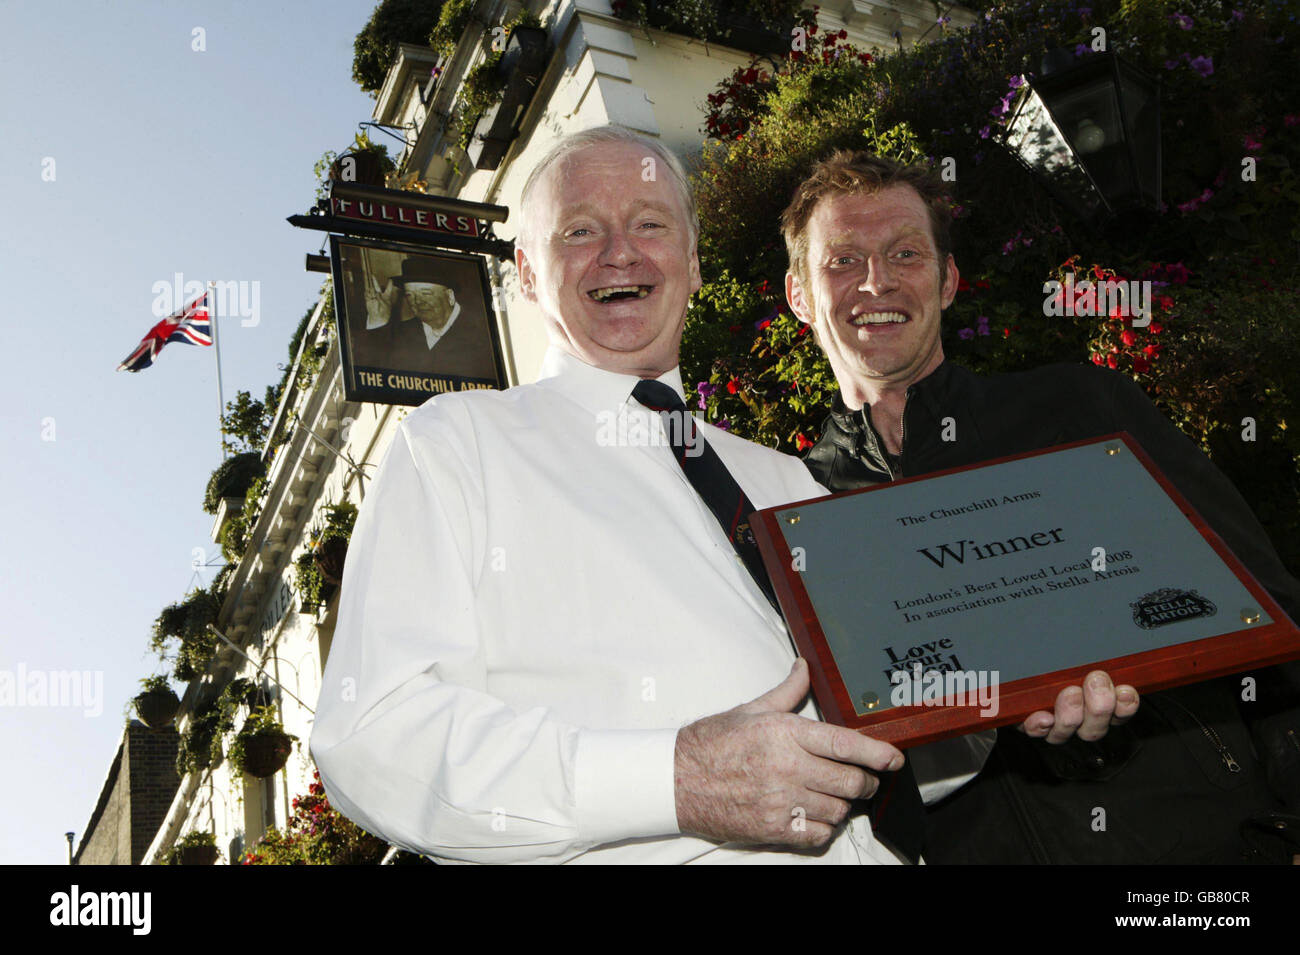 Landlord Gerry O'Brien, winner of the Stella Artois Love Your Local campaign and actor Jason Flemyng hold the winner's plaque outside The Churchill Arms on Kensington Church Street, London. Stock Photo